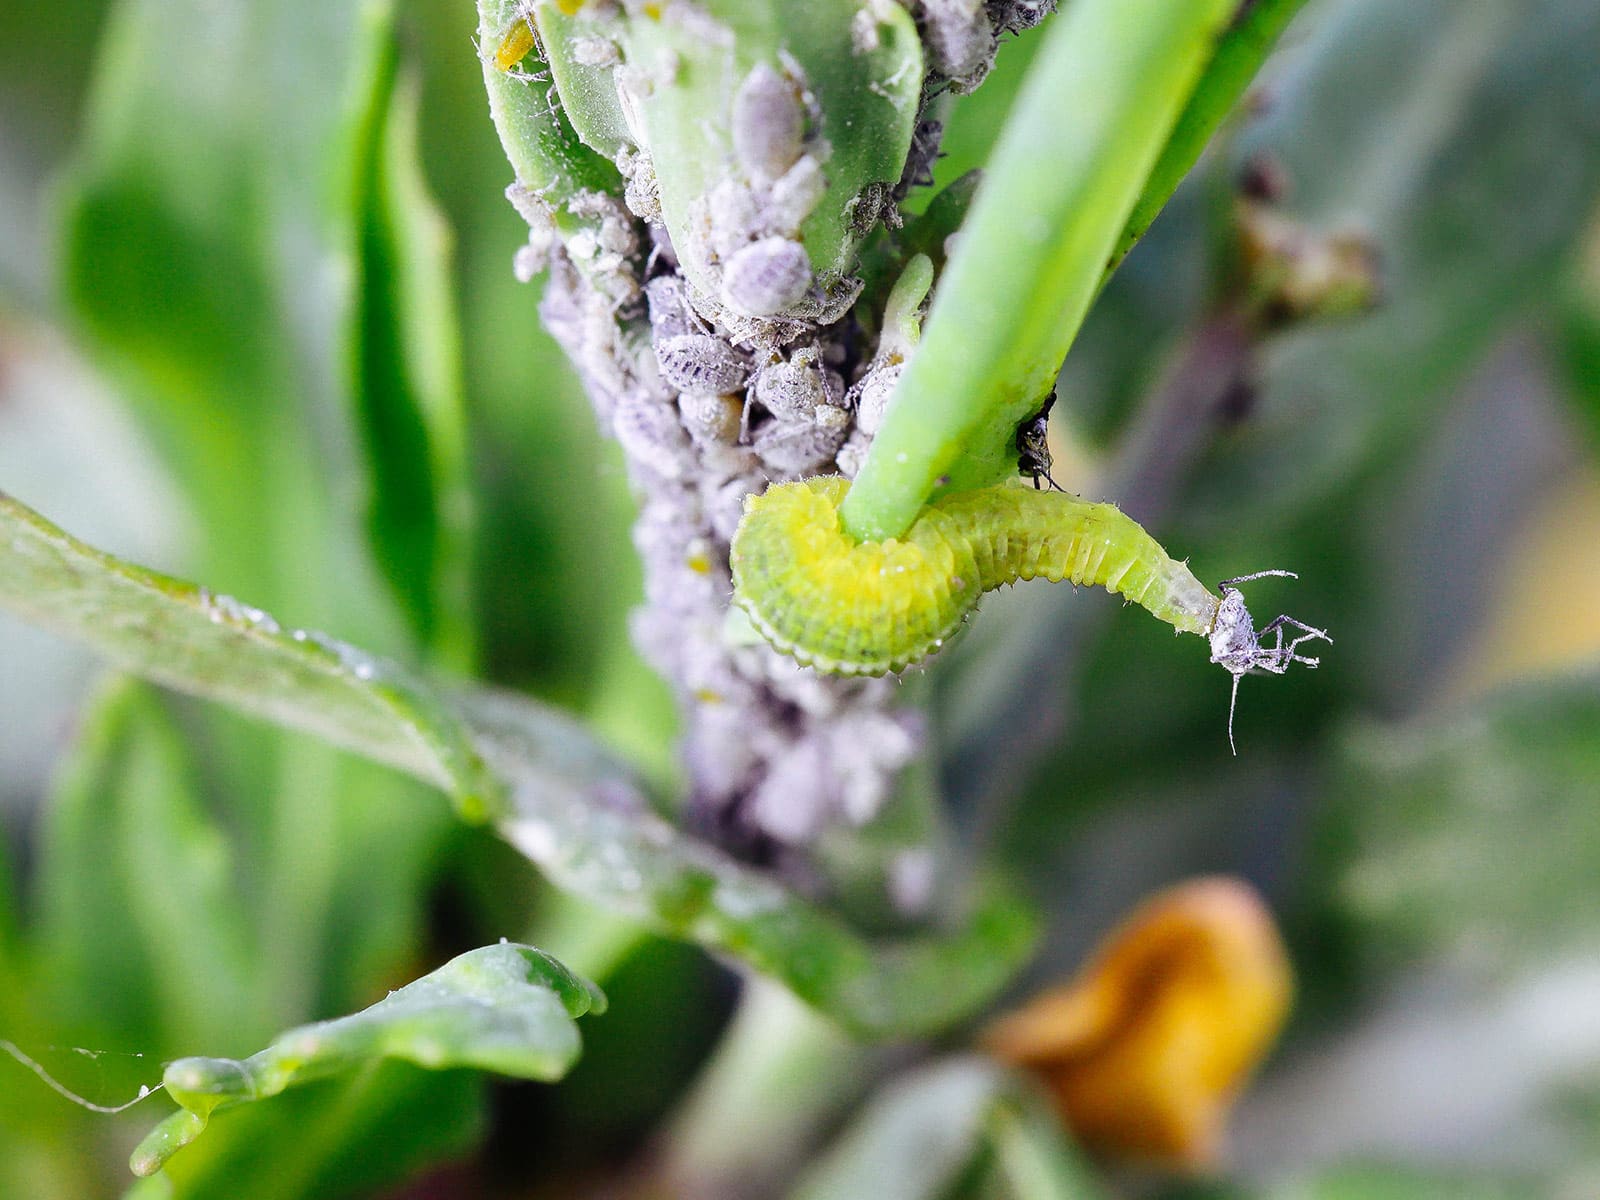 Green hoverfly maggot attacking a gray aphid while holding on to a stem infested with more aphids